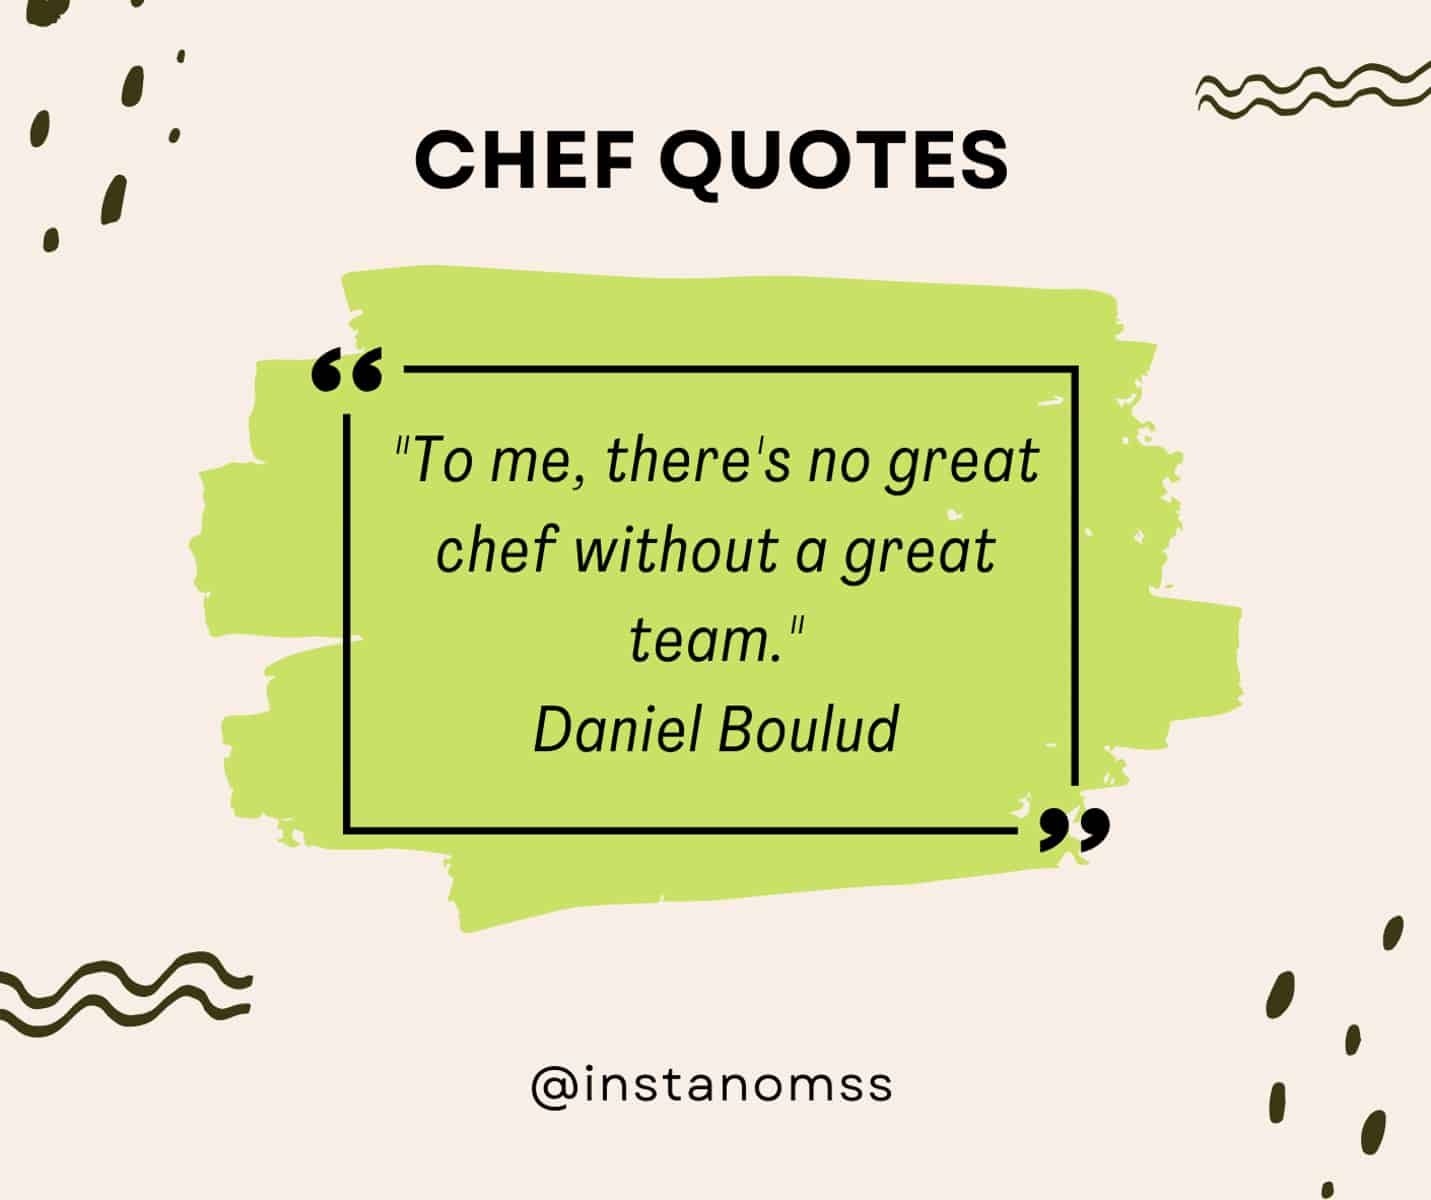 "To me, there's no great chef without a great team." Daniel Boulud